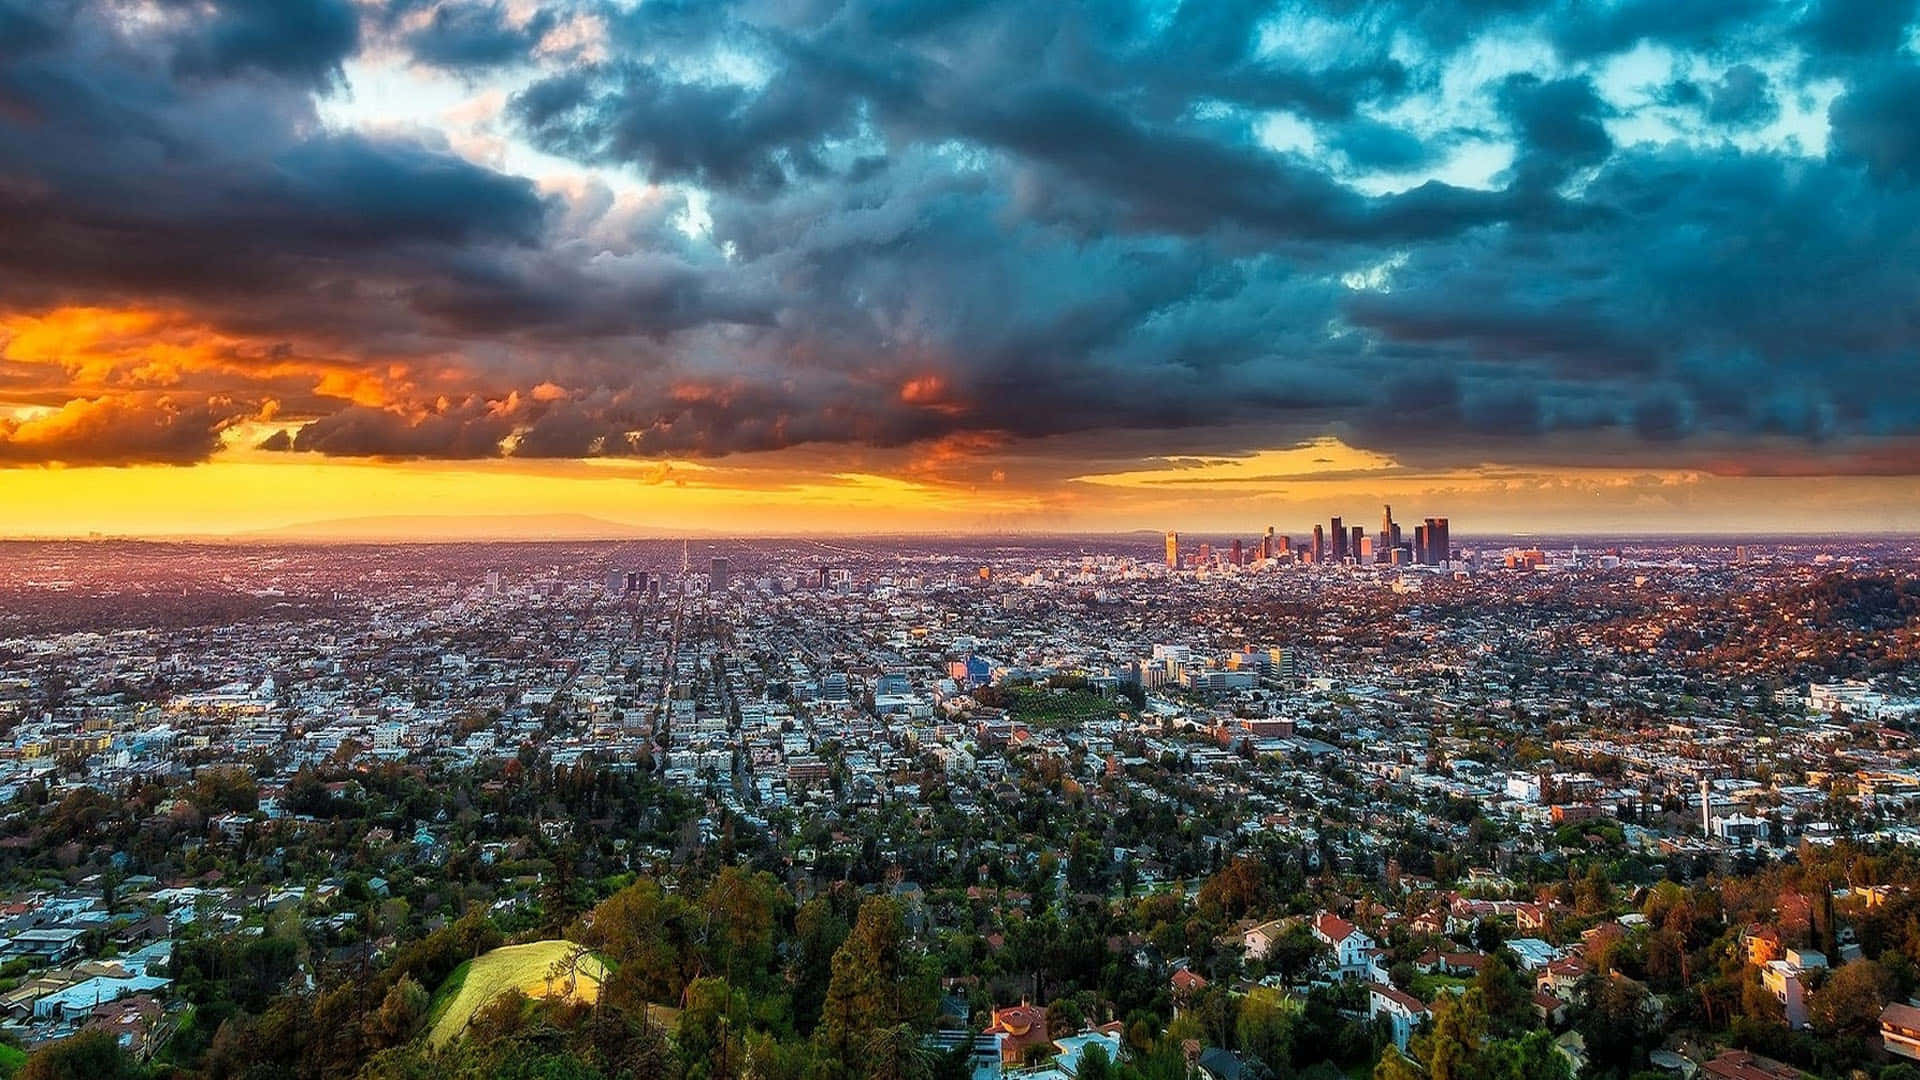 A scenic view of the iconic Los Angeles skyline at dusk